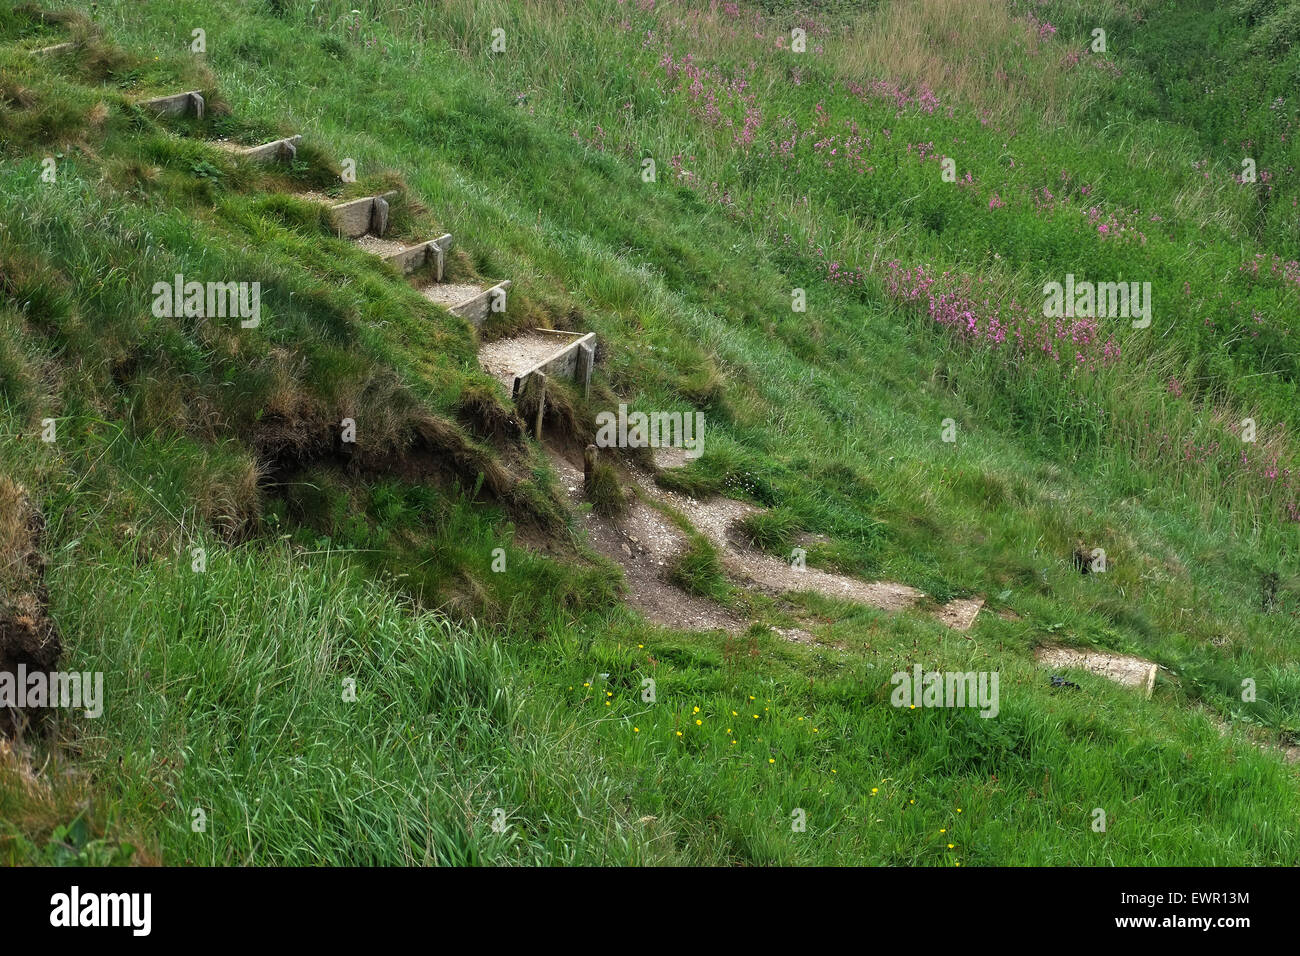 wooden steps down steep incline eroding away. Stock Photo